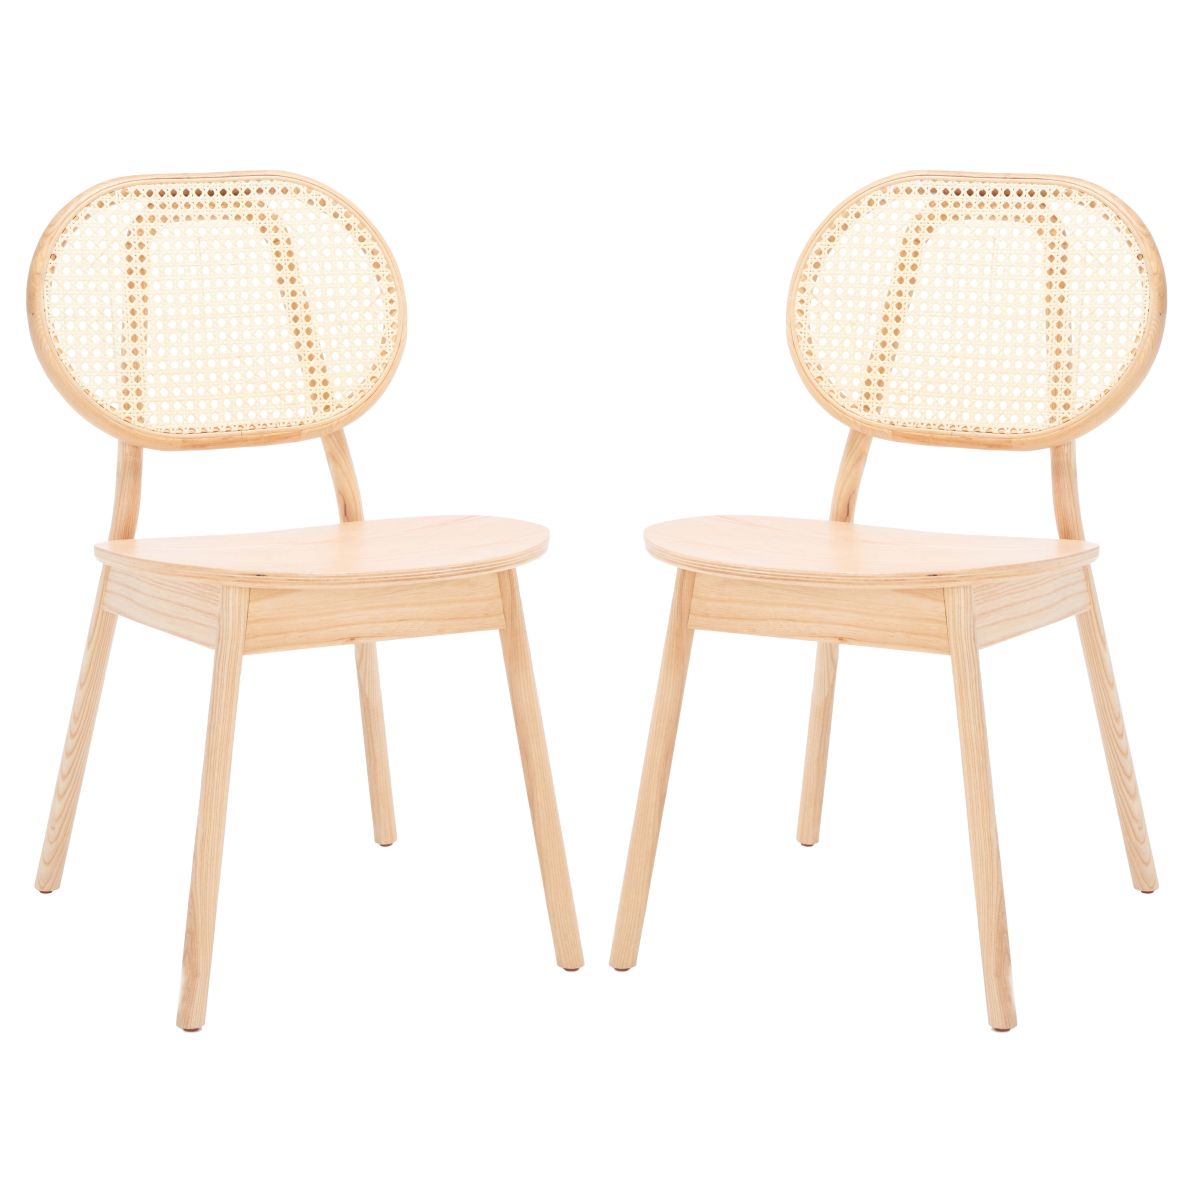 Safavieh Couture Kristianna Rattan Back Dining Chair(Set of 2) , SFV4127 - Natural